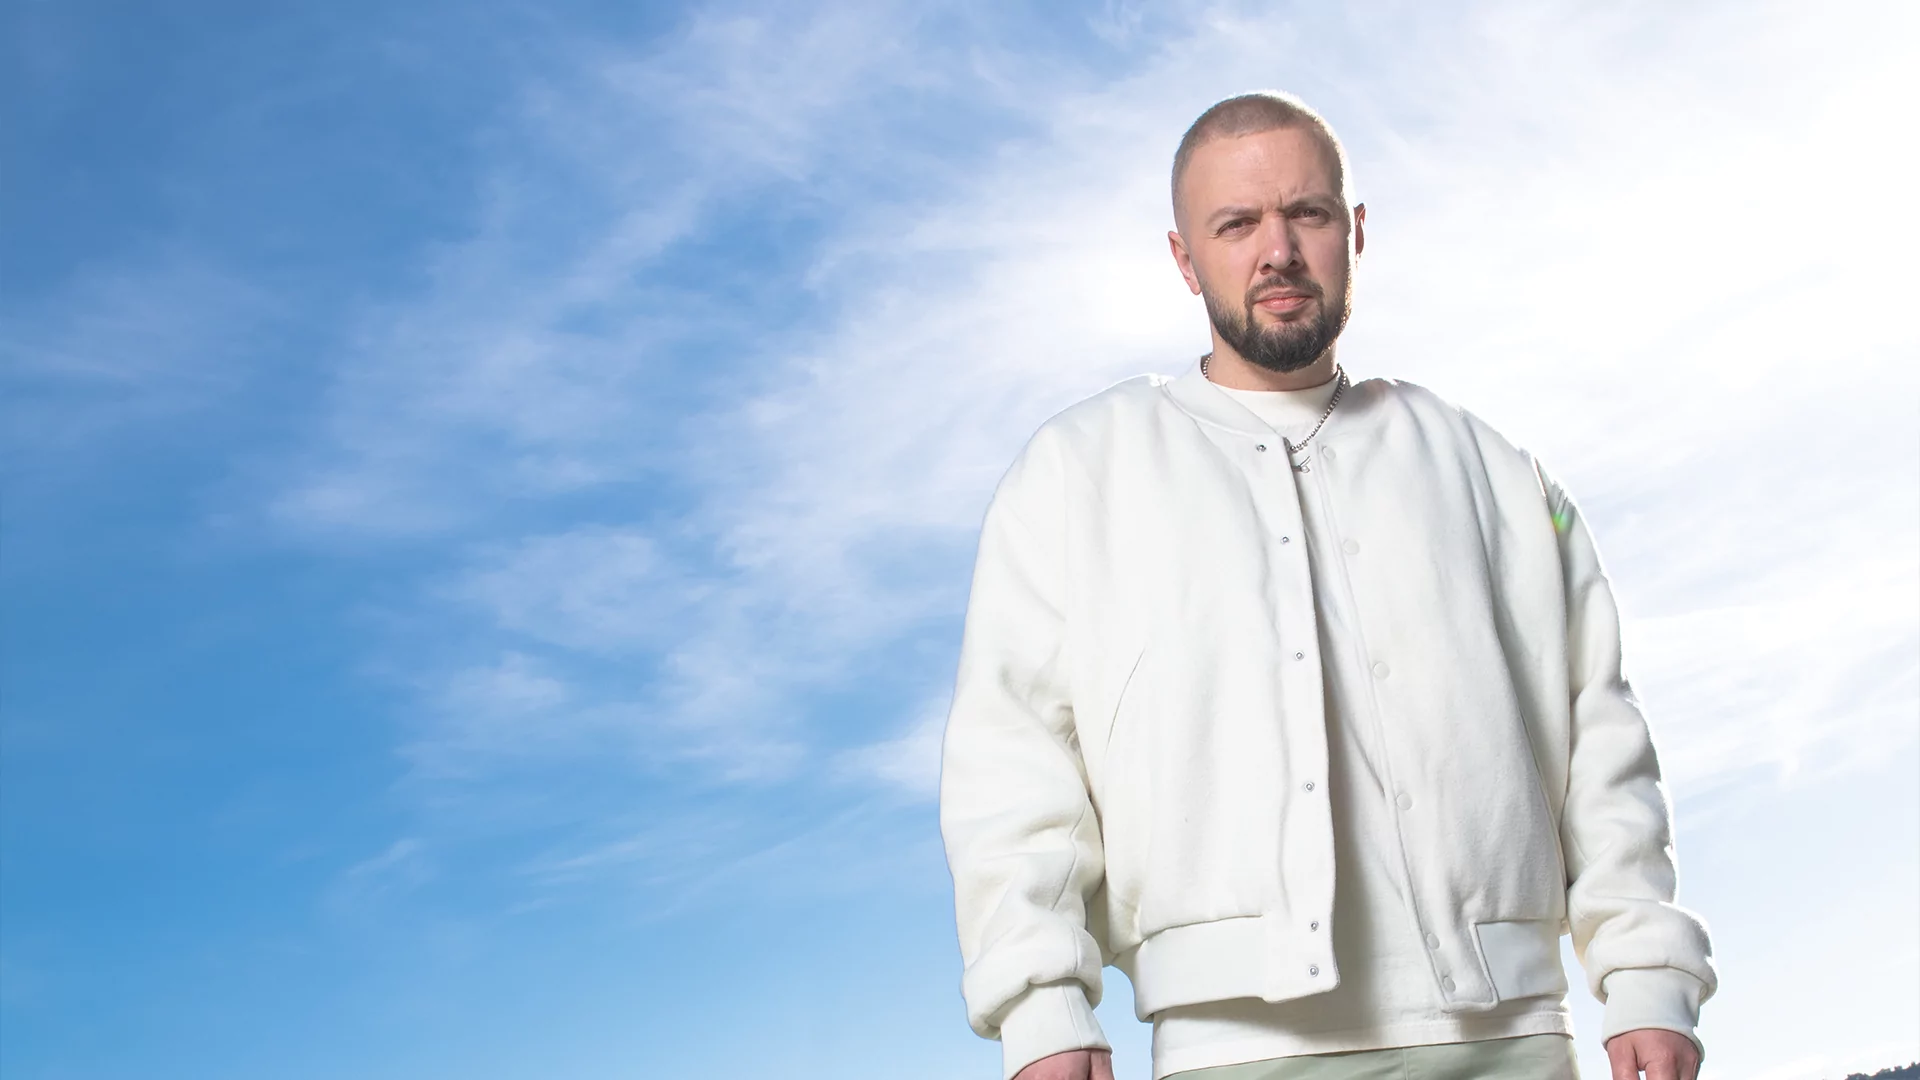 Photo of Chris Lake wearing an all-white outfit posing against the sky.